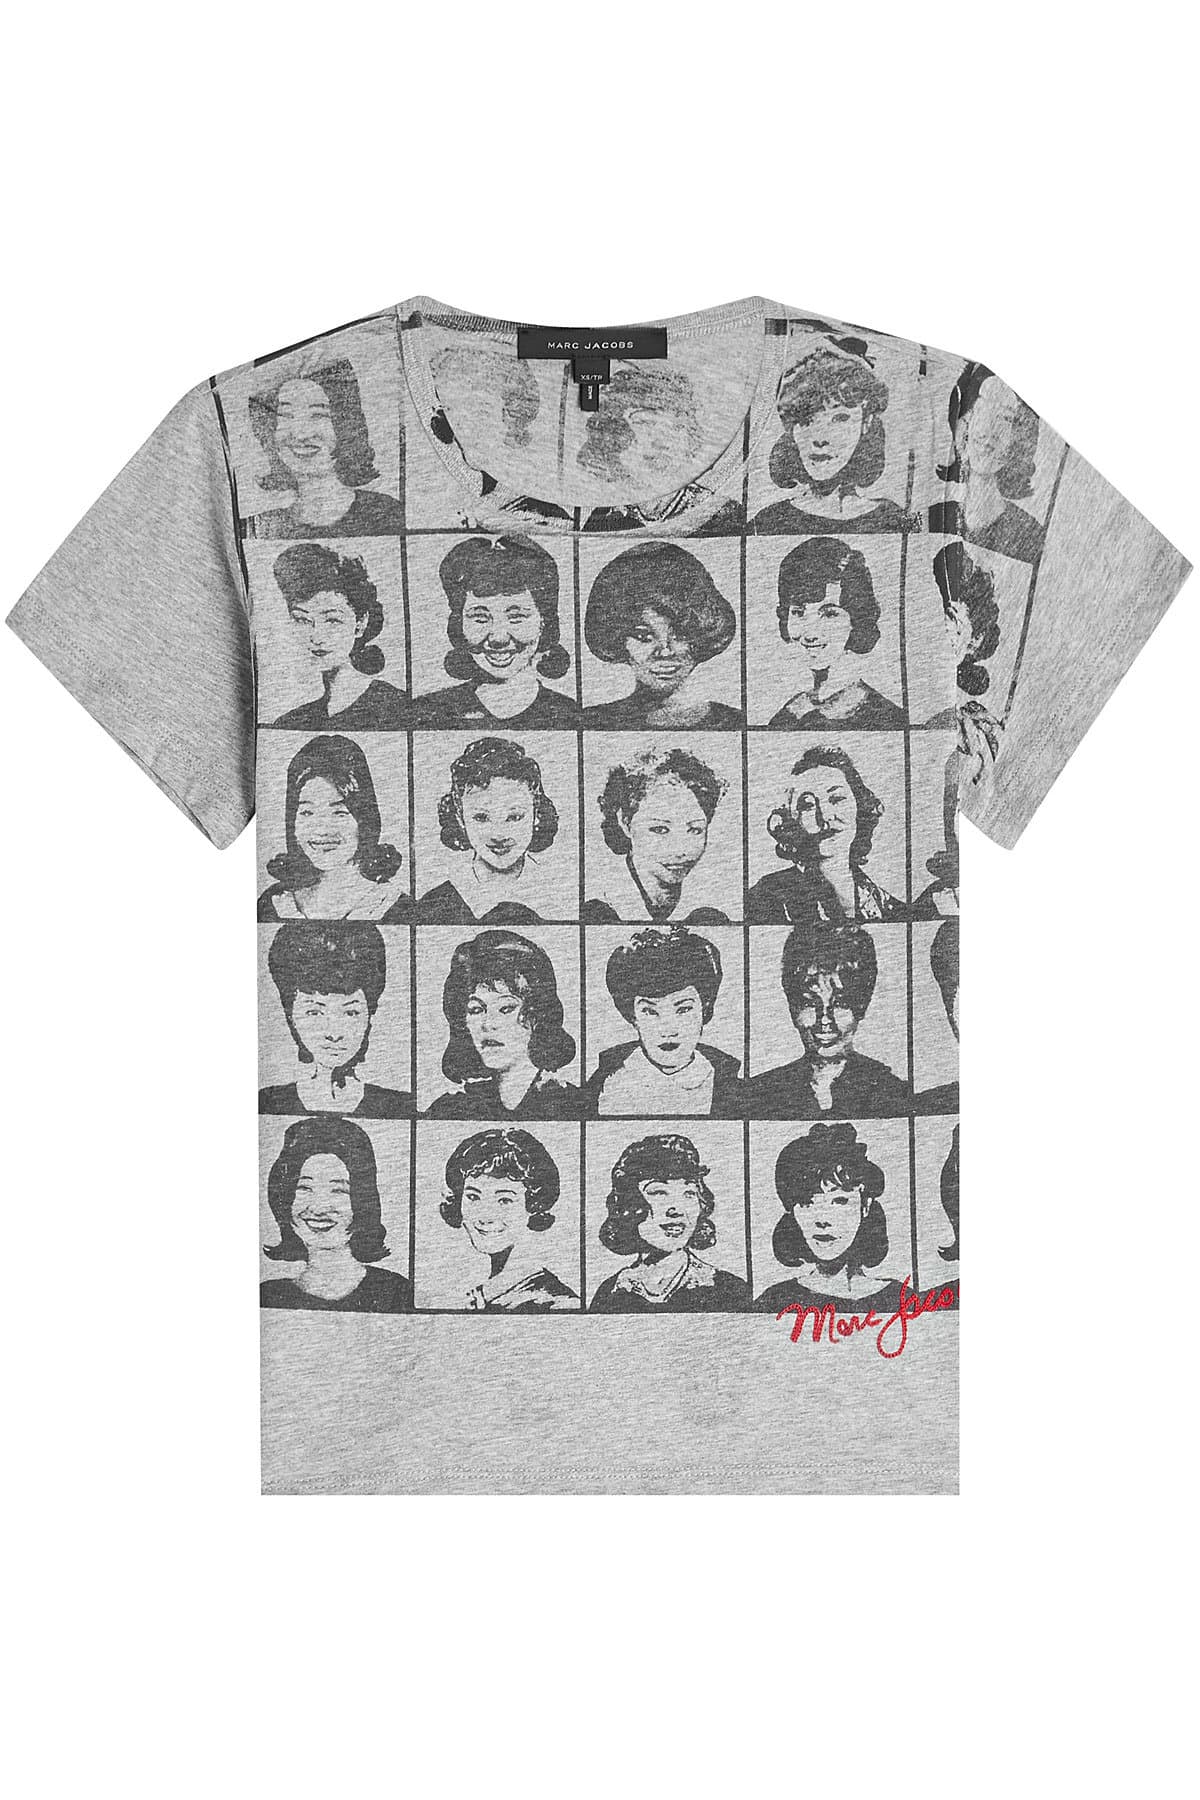 Marc Jacobs - Yearbook Printed Cotton T-Shirt